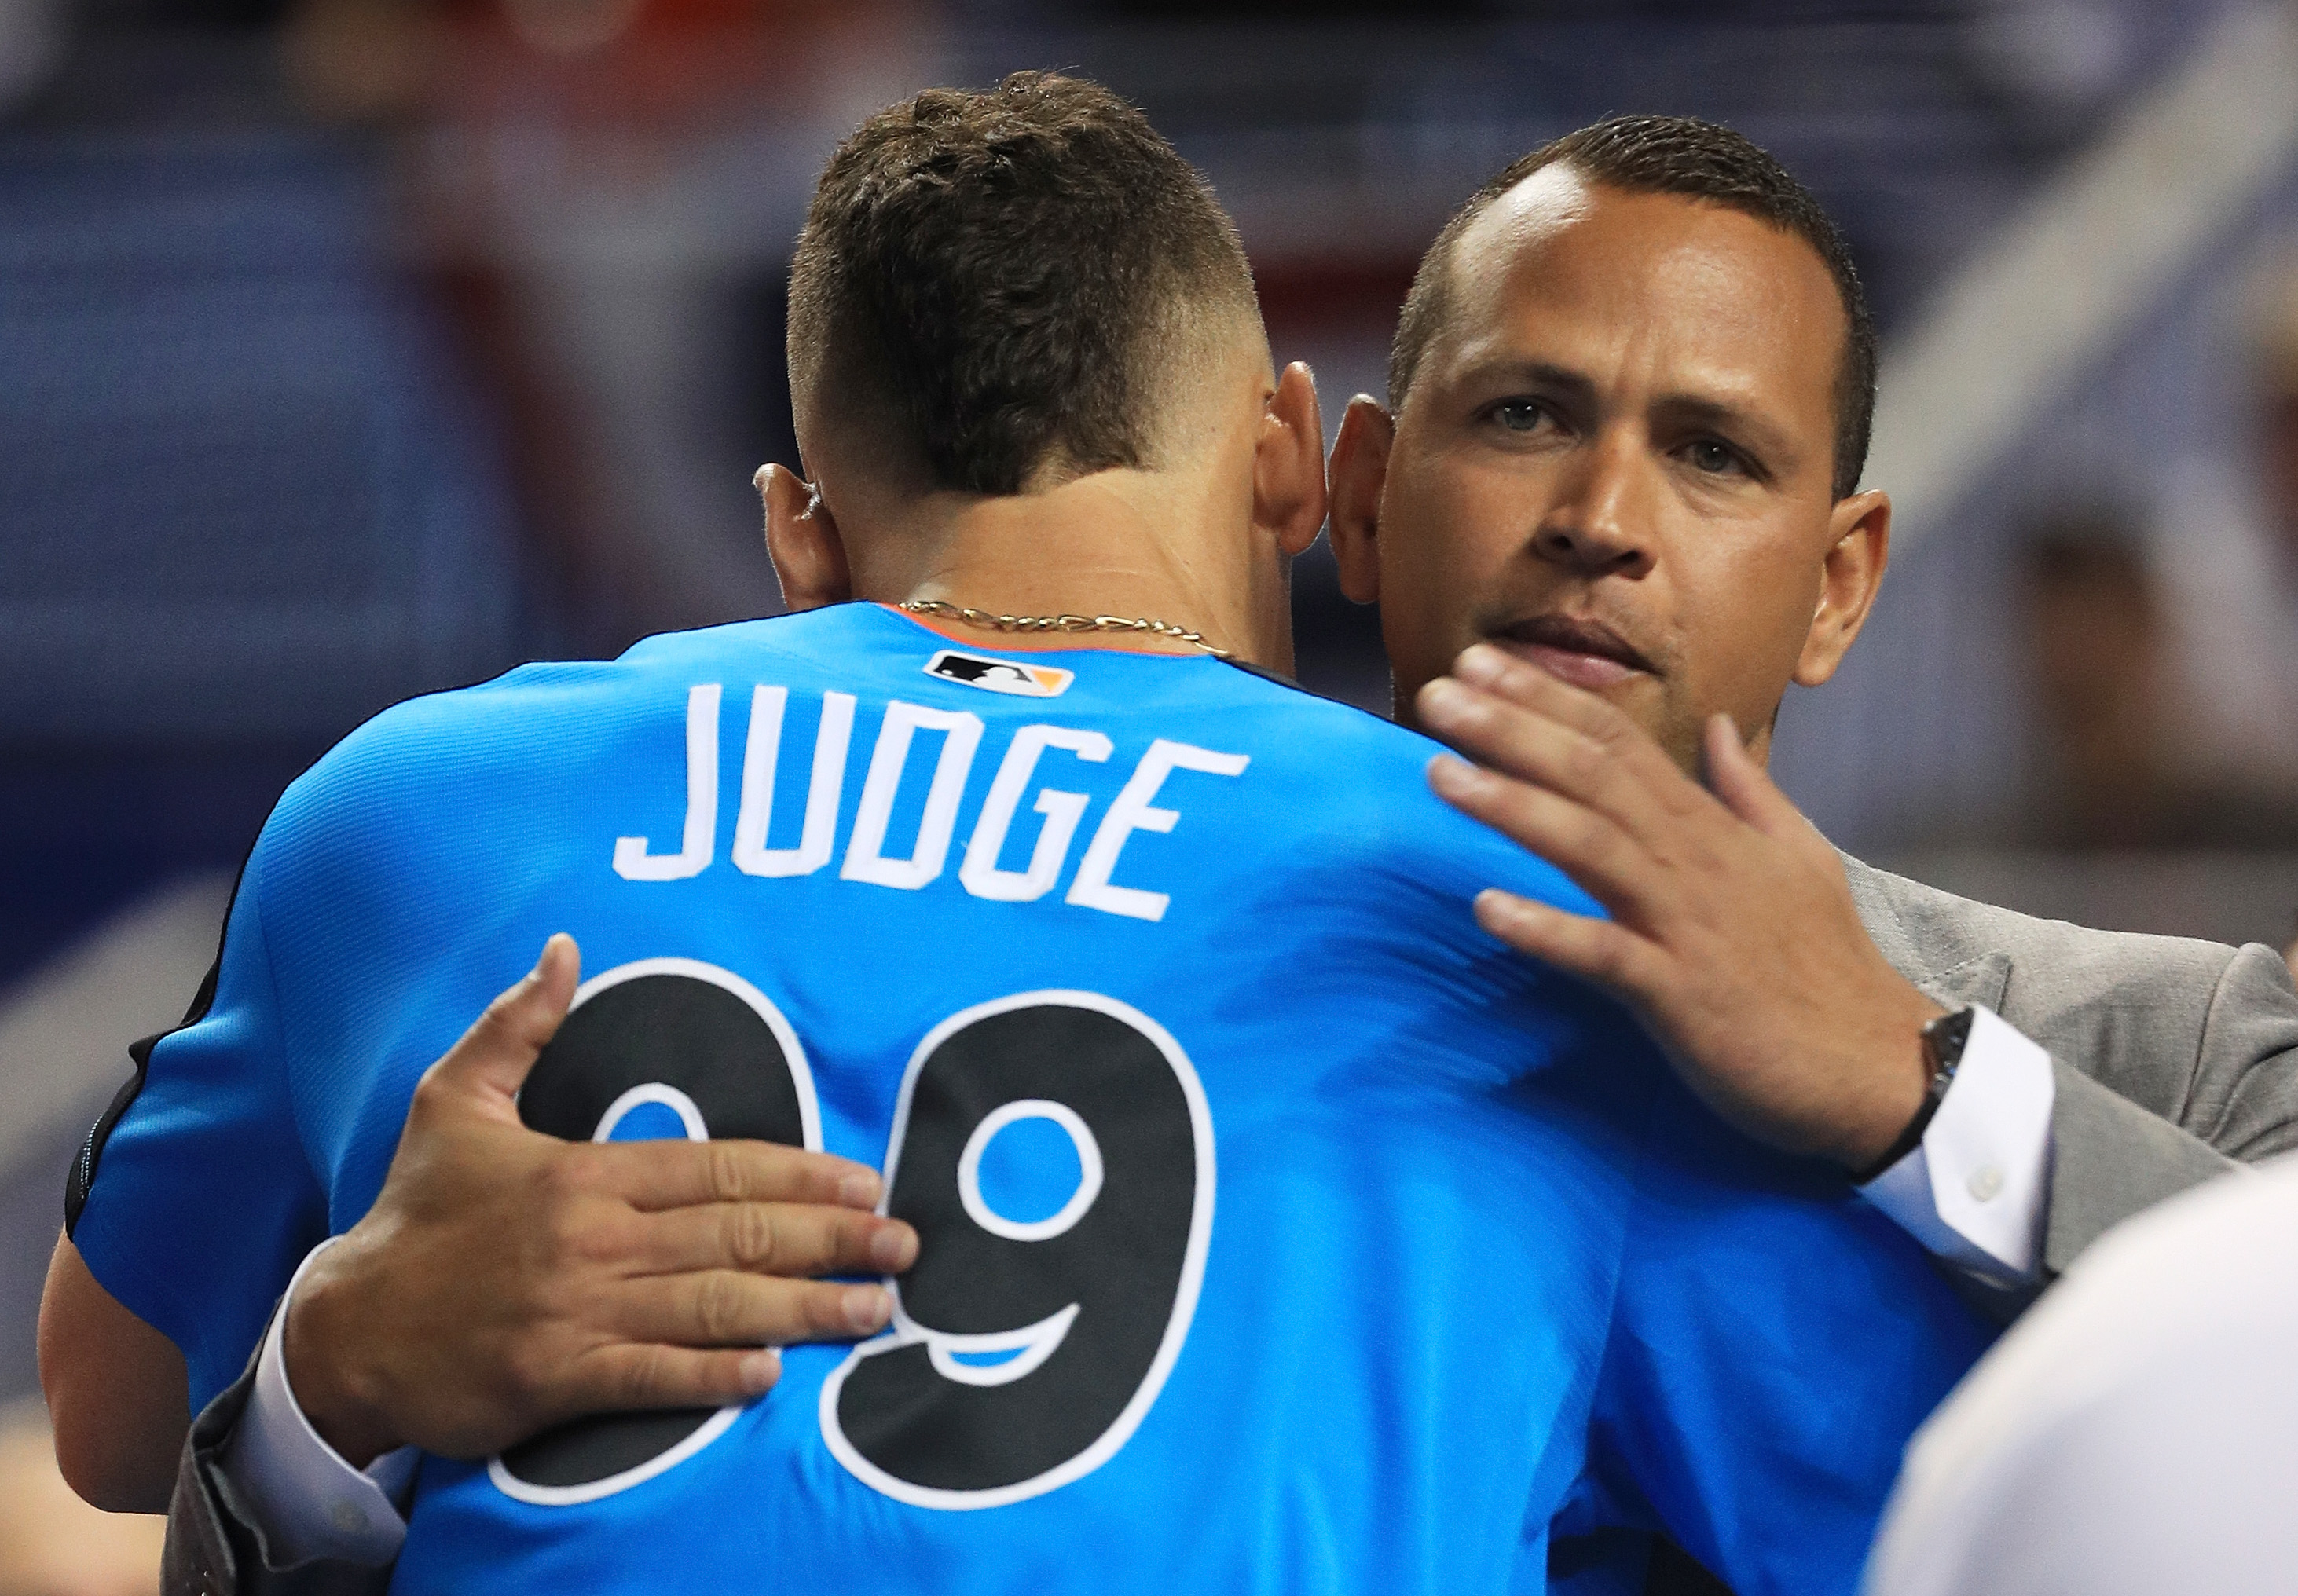 Two baseball players embracing on the field; one with &#x27;JUDGE 99&#x27; on his jersey